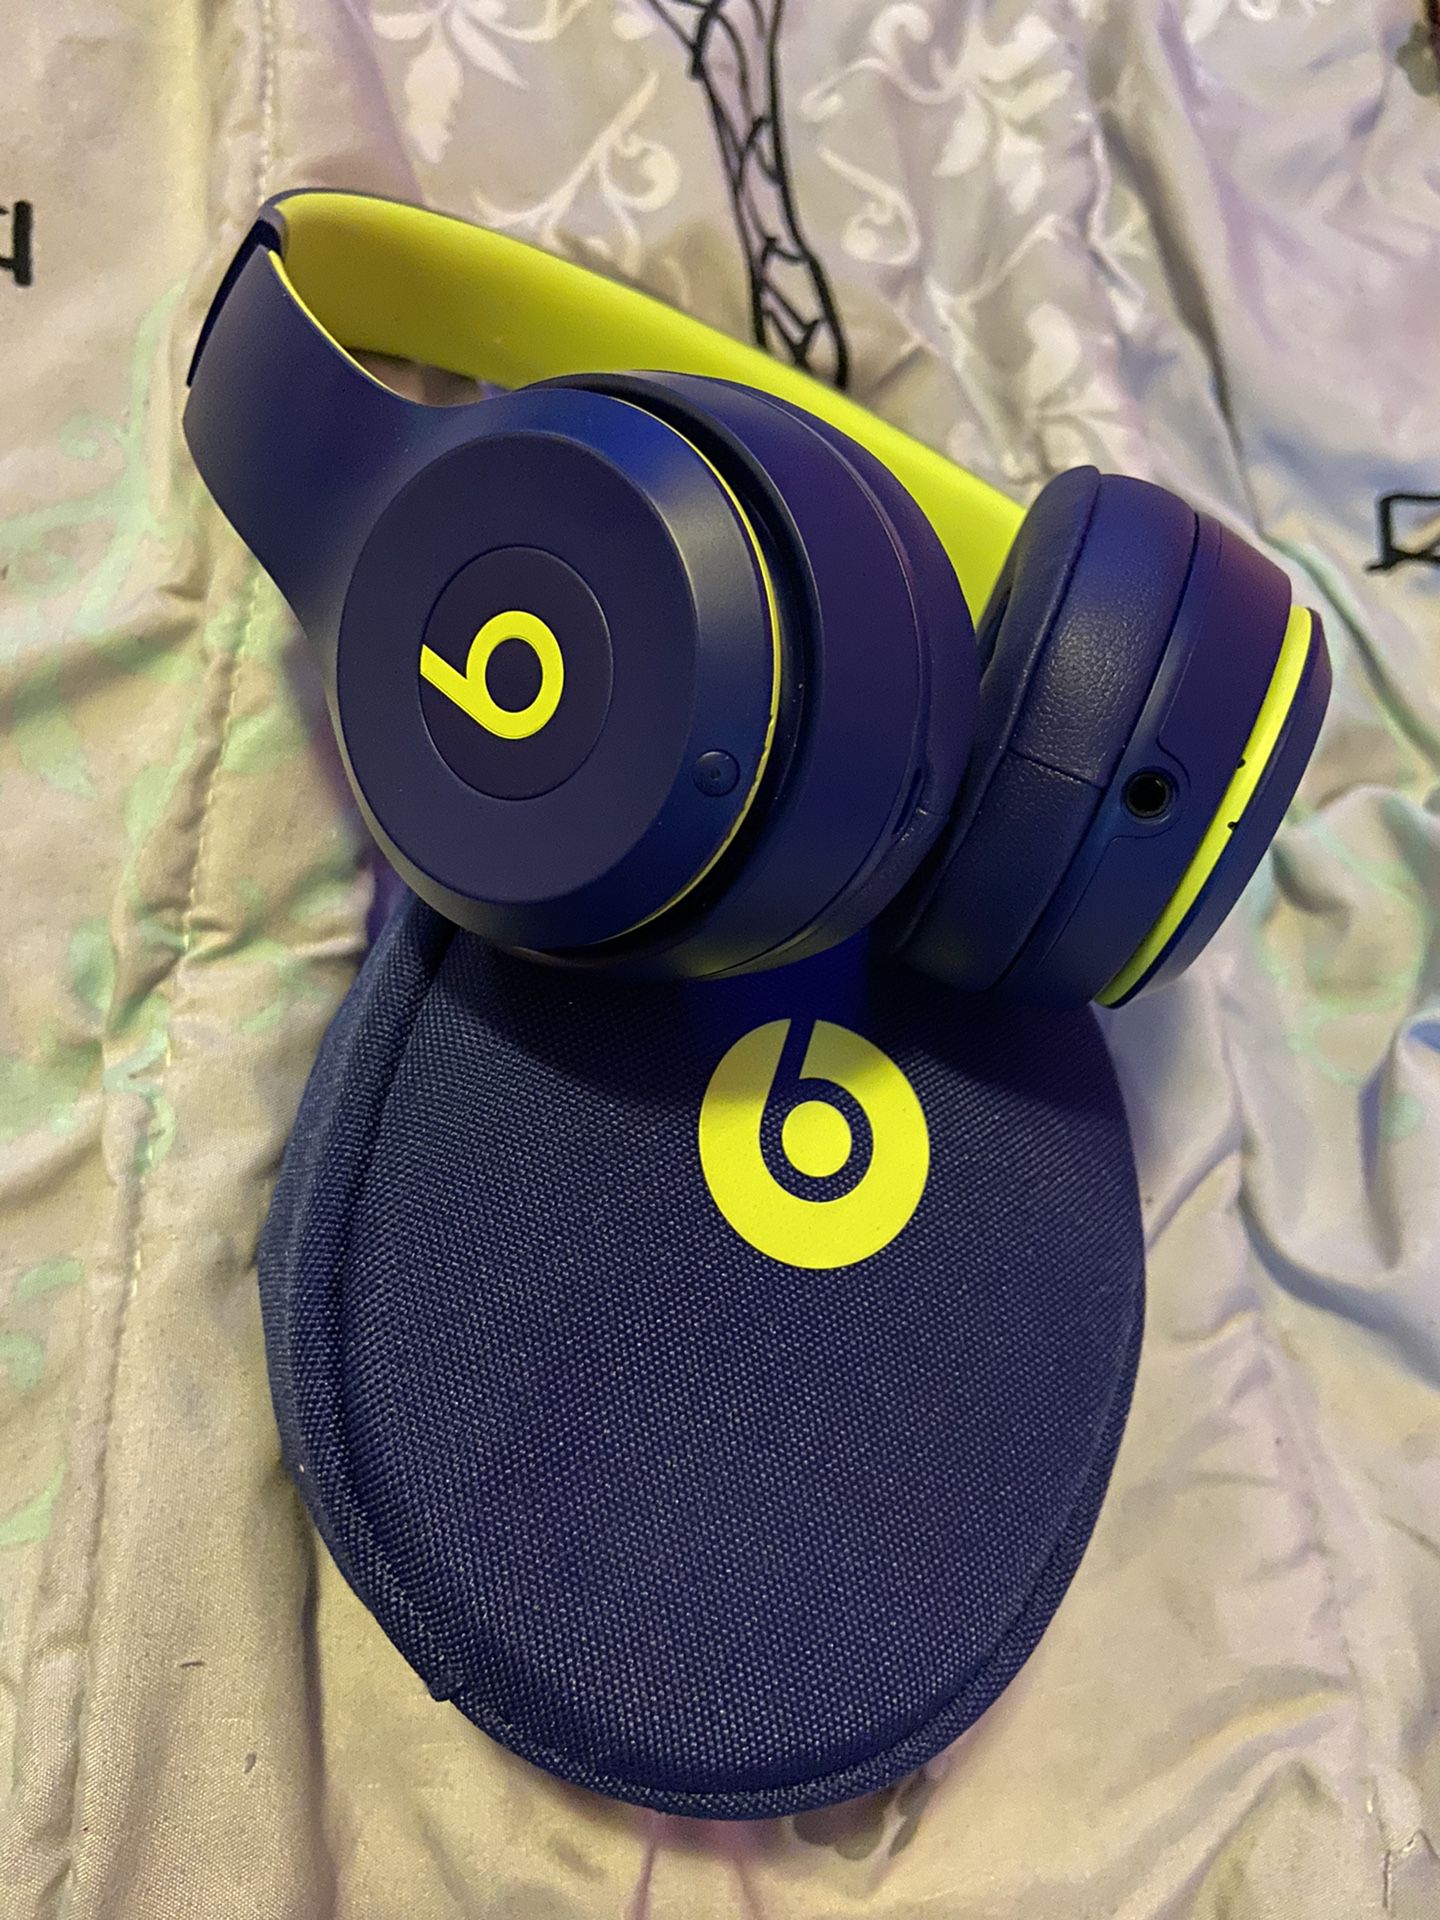 New limited edition solo beats 3